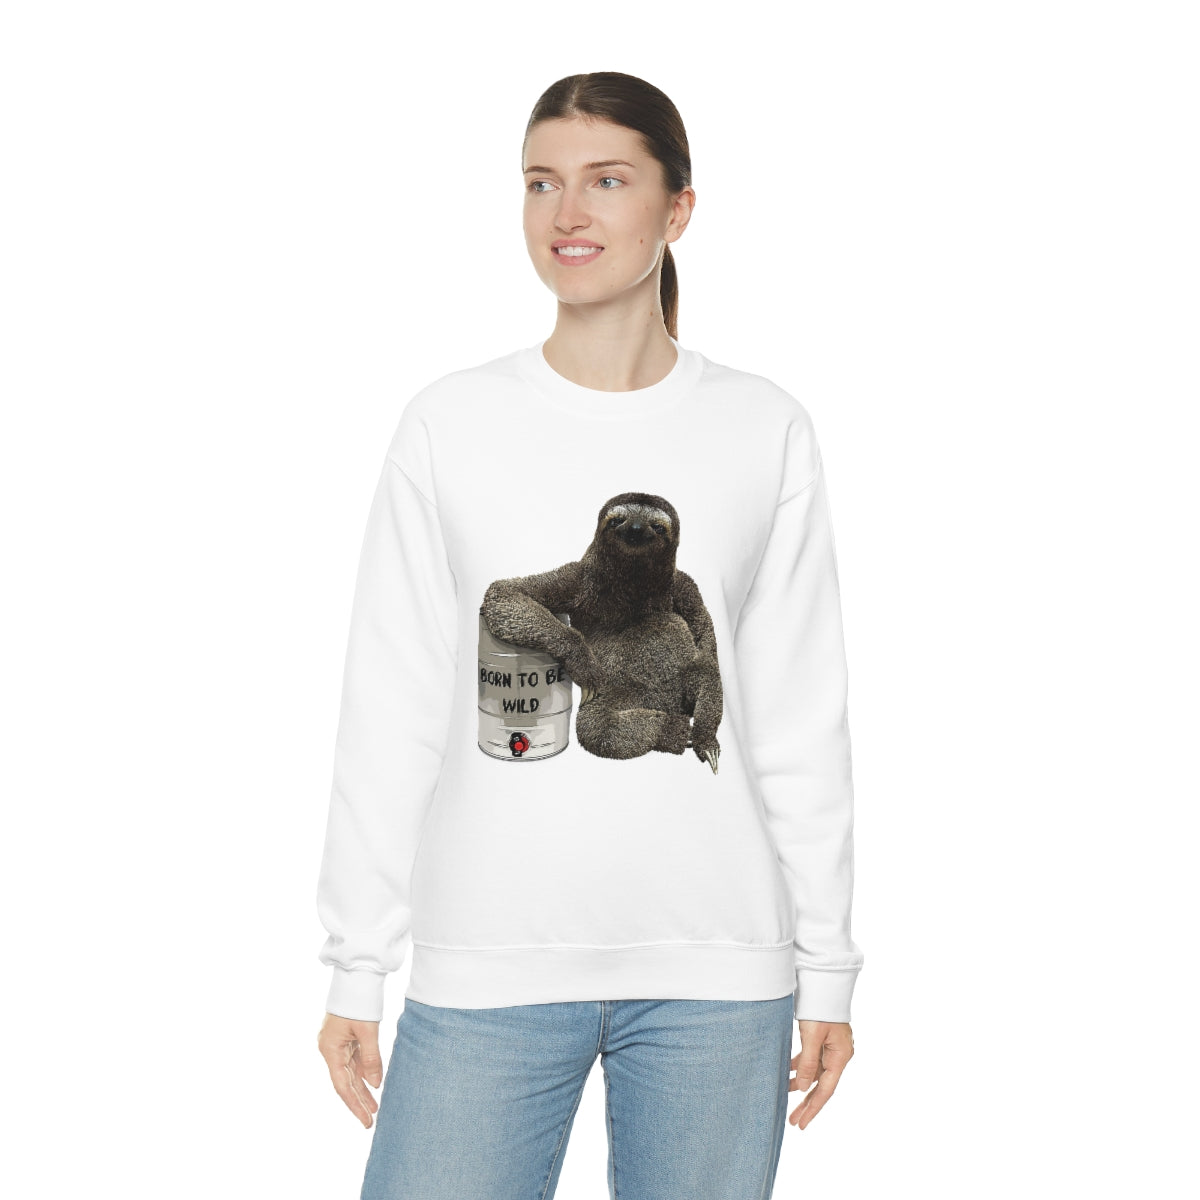 Born to be wild- Party Sloth with beer keg - Unisex Heavy Blend™ Crewneck Sweatshirt